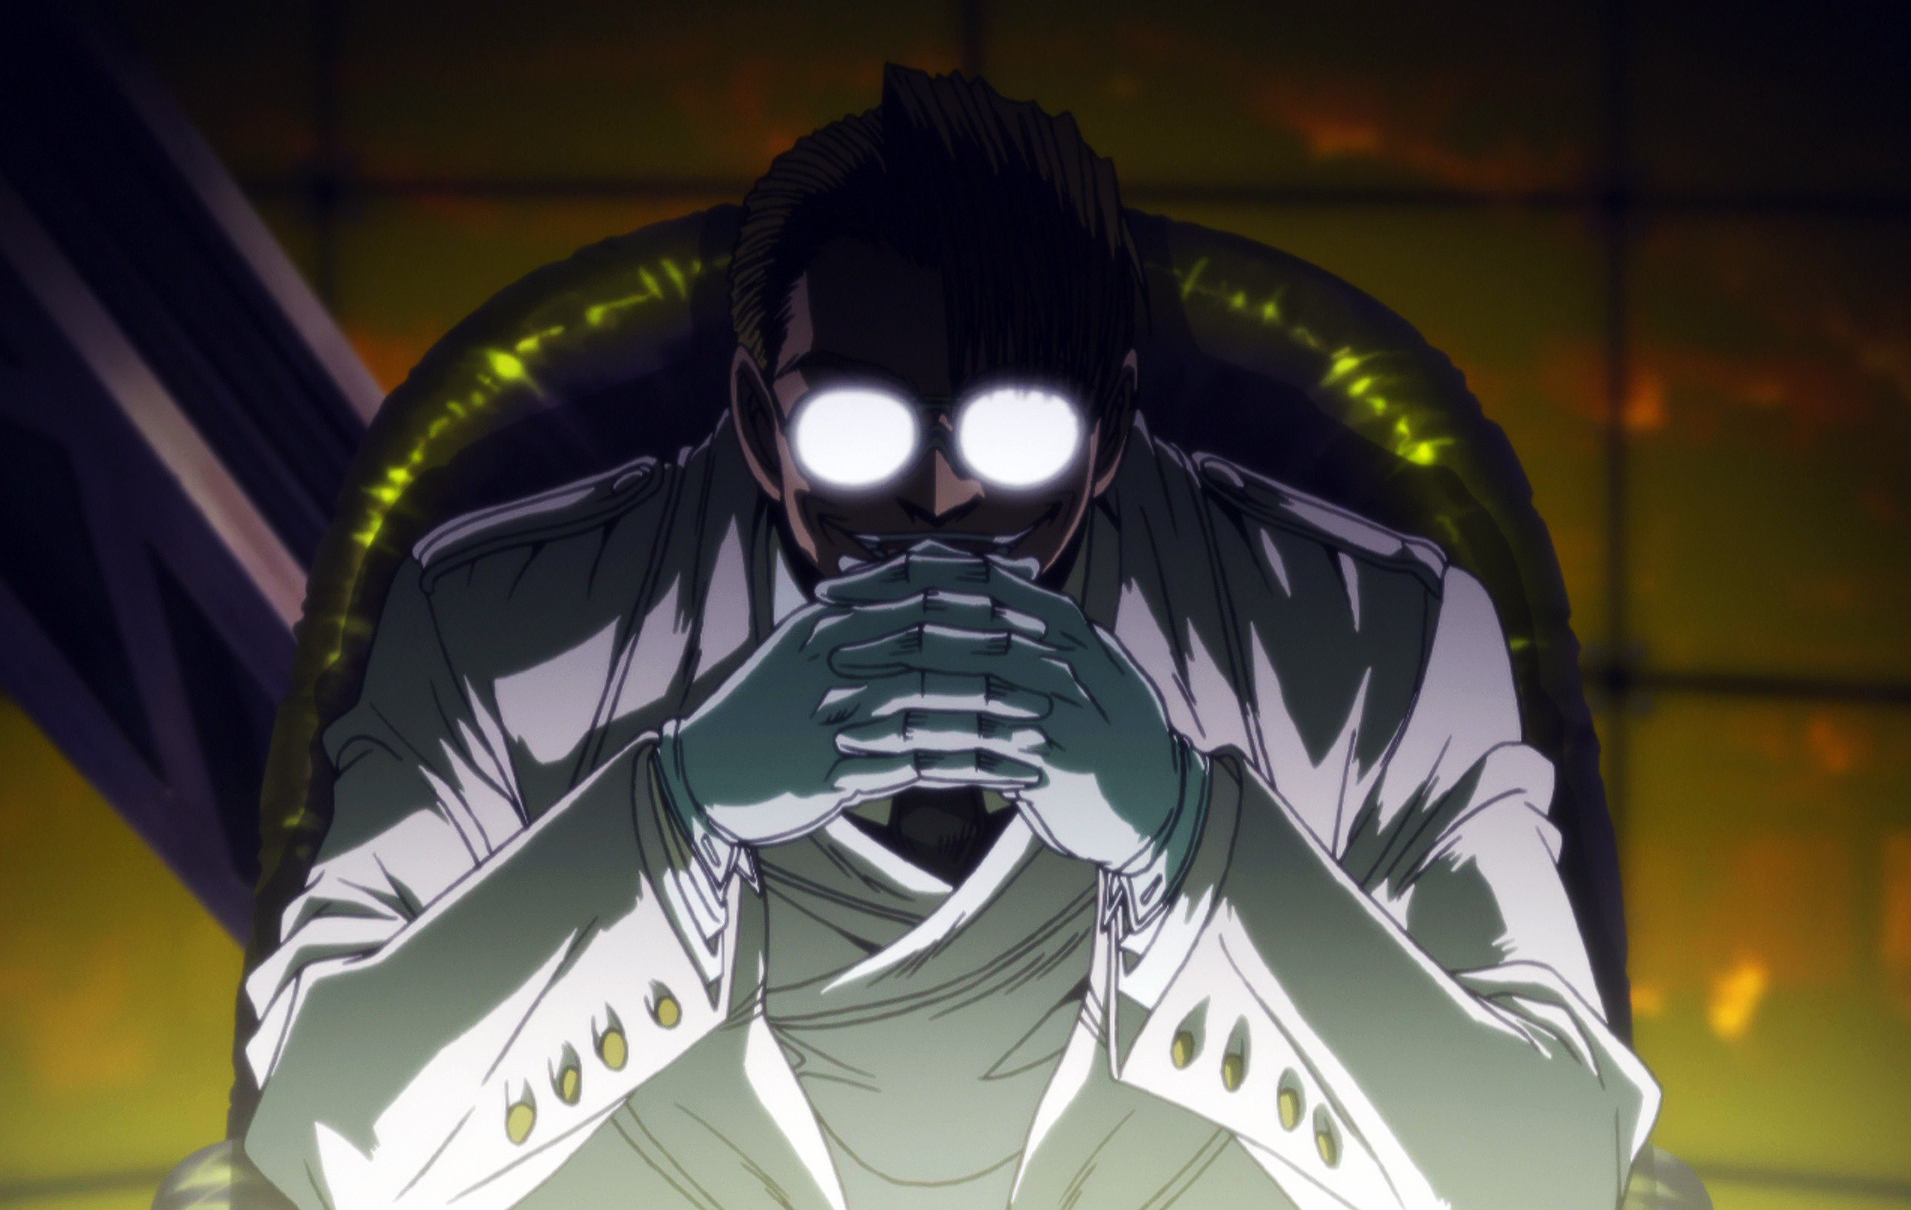 10 Hellsing 2001 Characters That Don't Appear in Hellsing Ultimate – Anime  Explored 